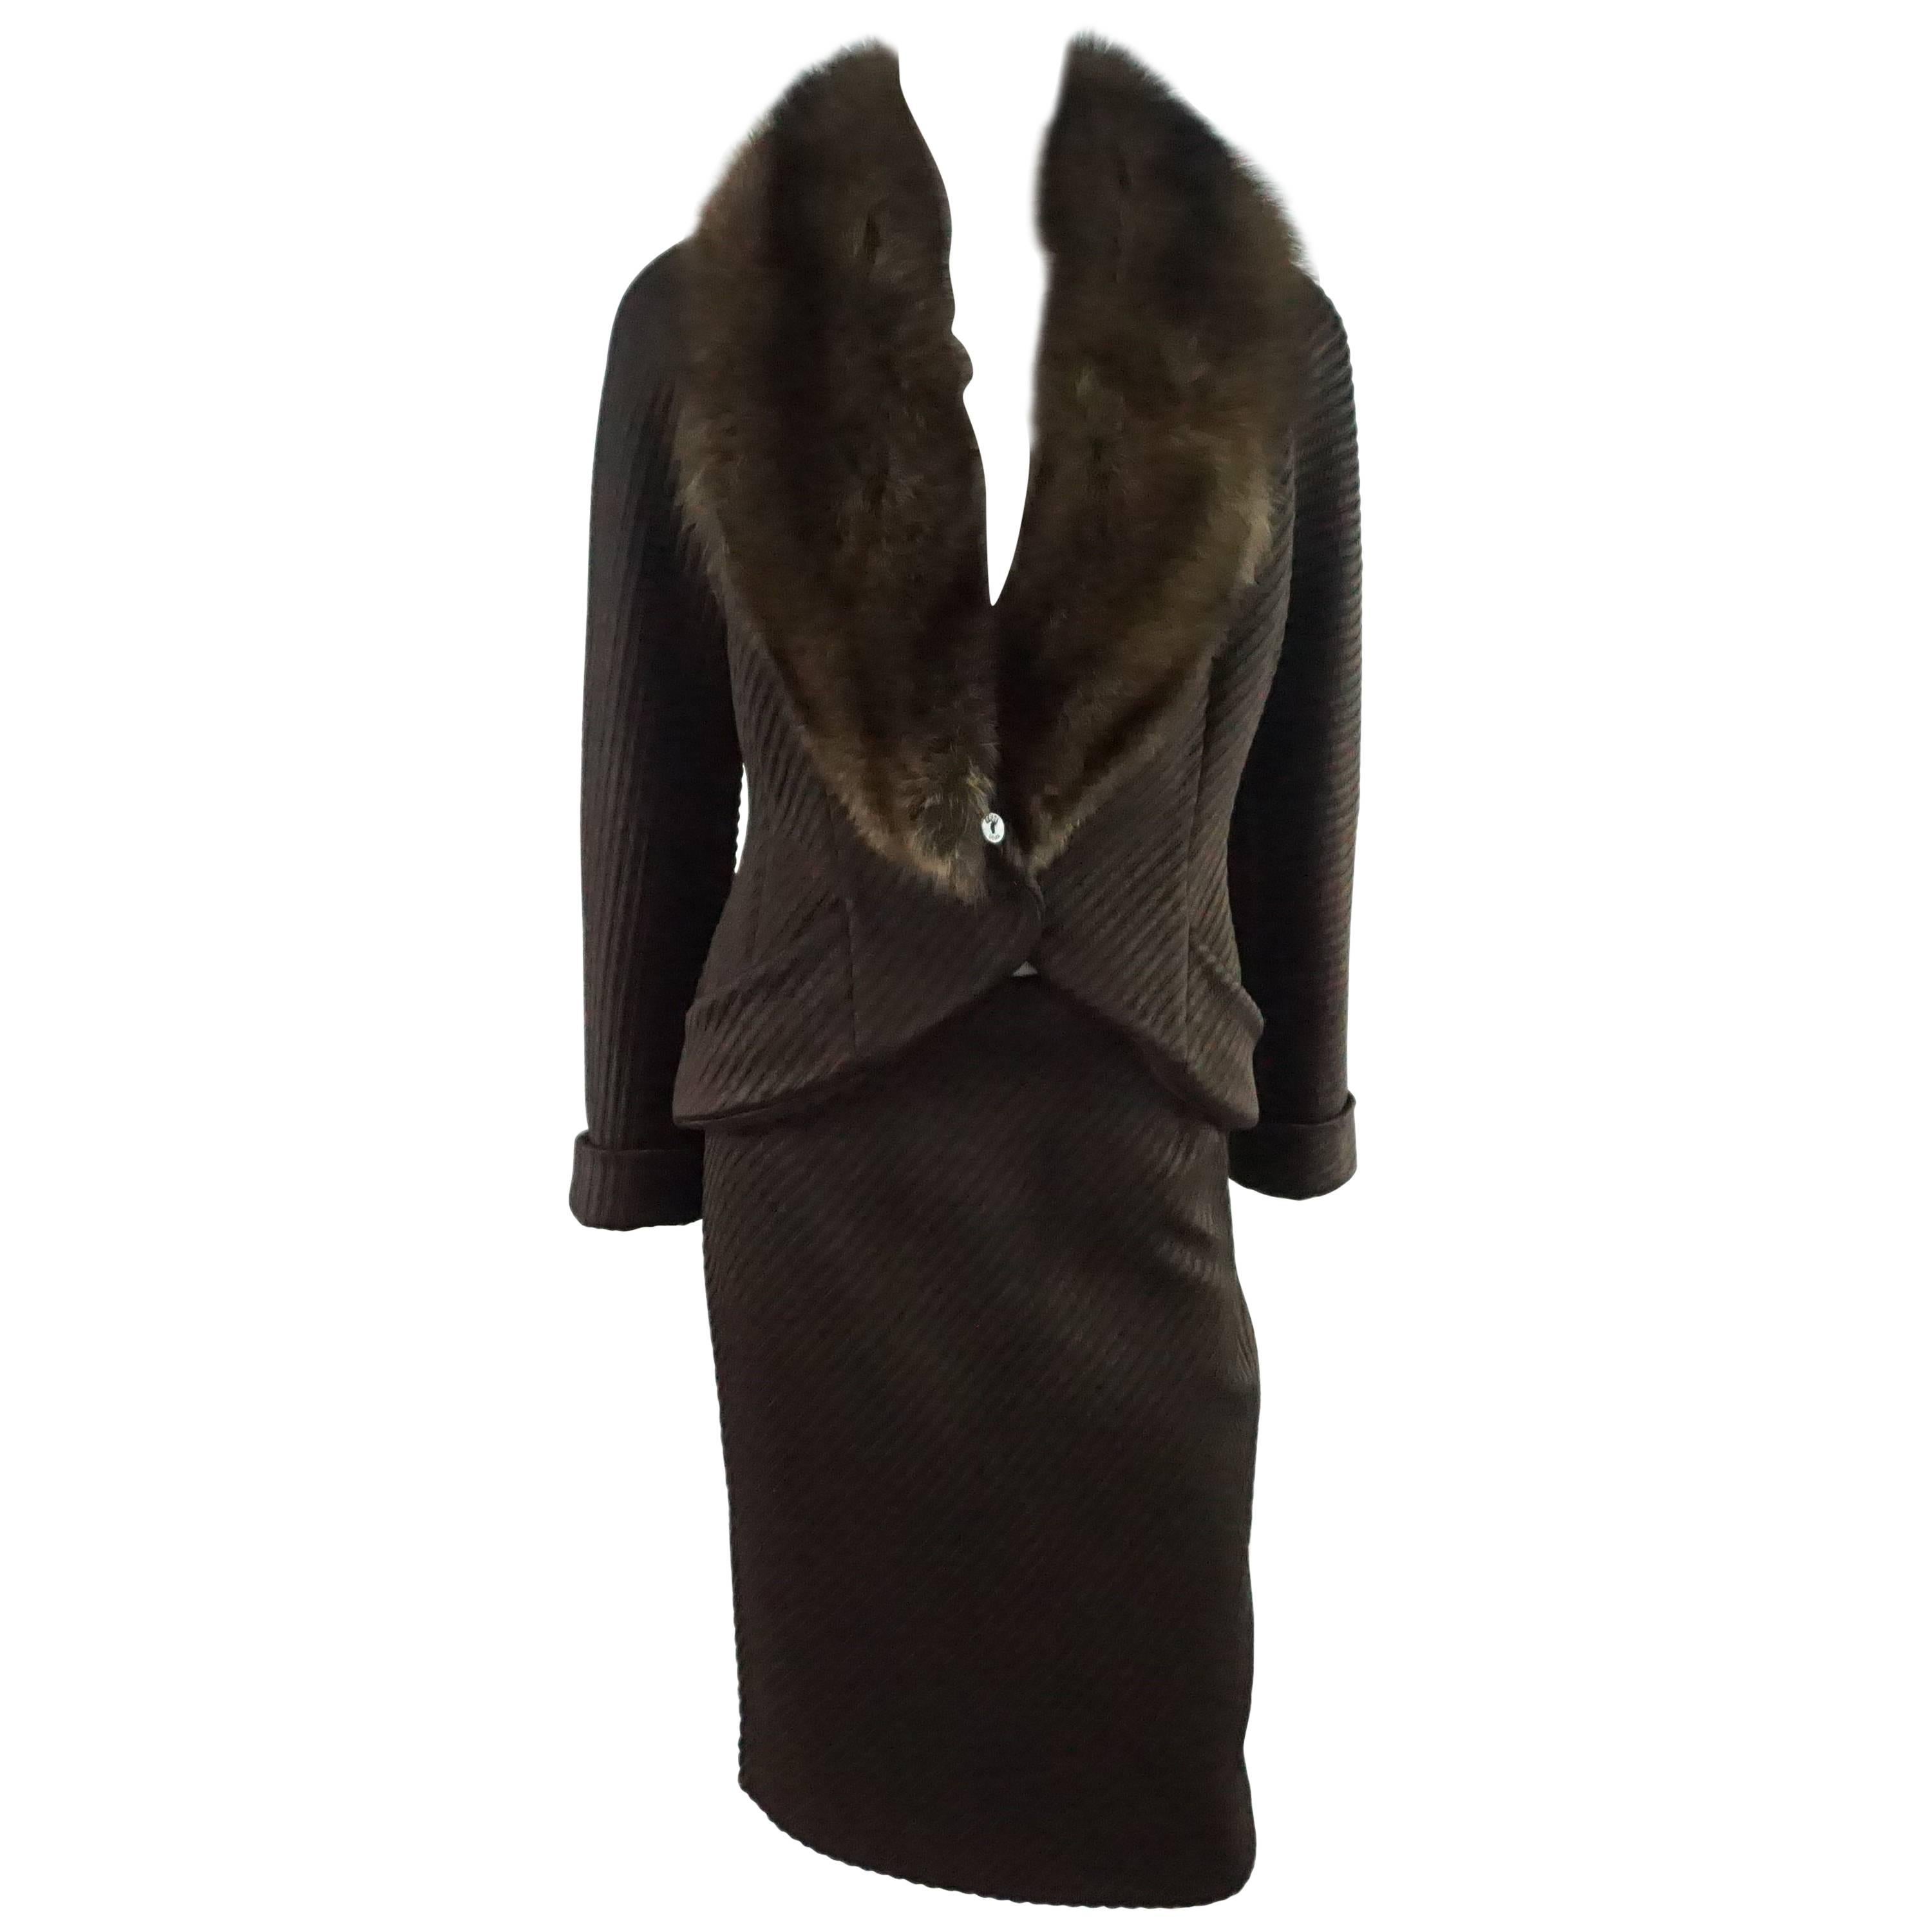 Fendi Chocolate Brown Ribbed Skirt Suit with Fisher Fur Collar - 44 - 1970's  For Sale